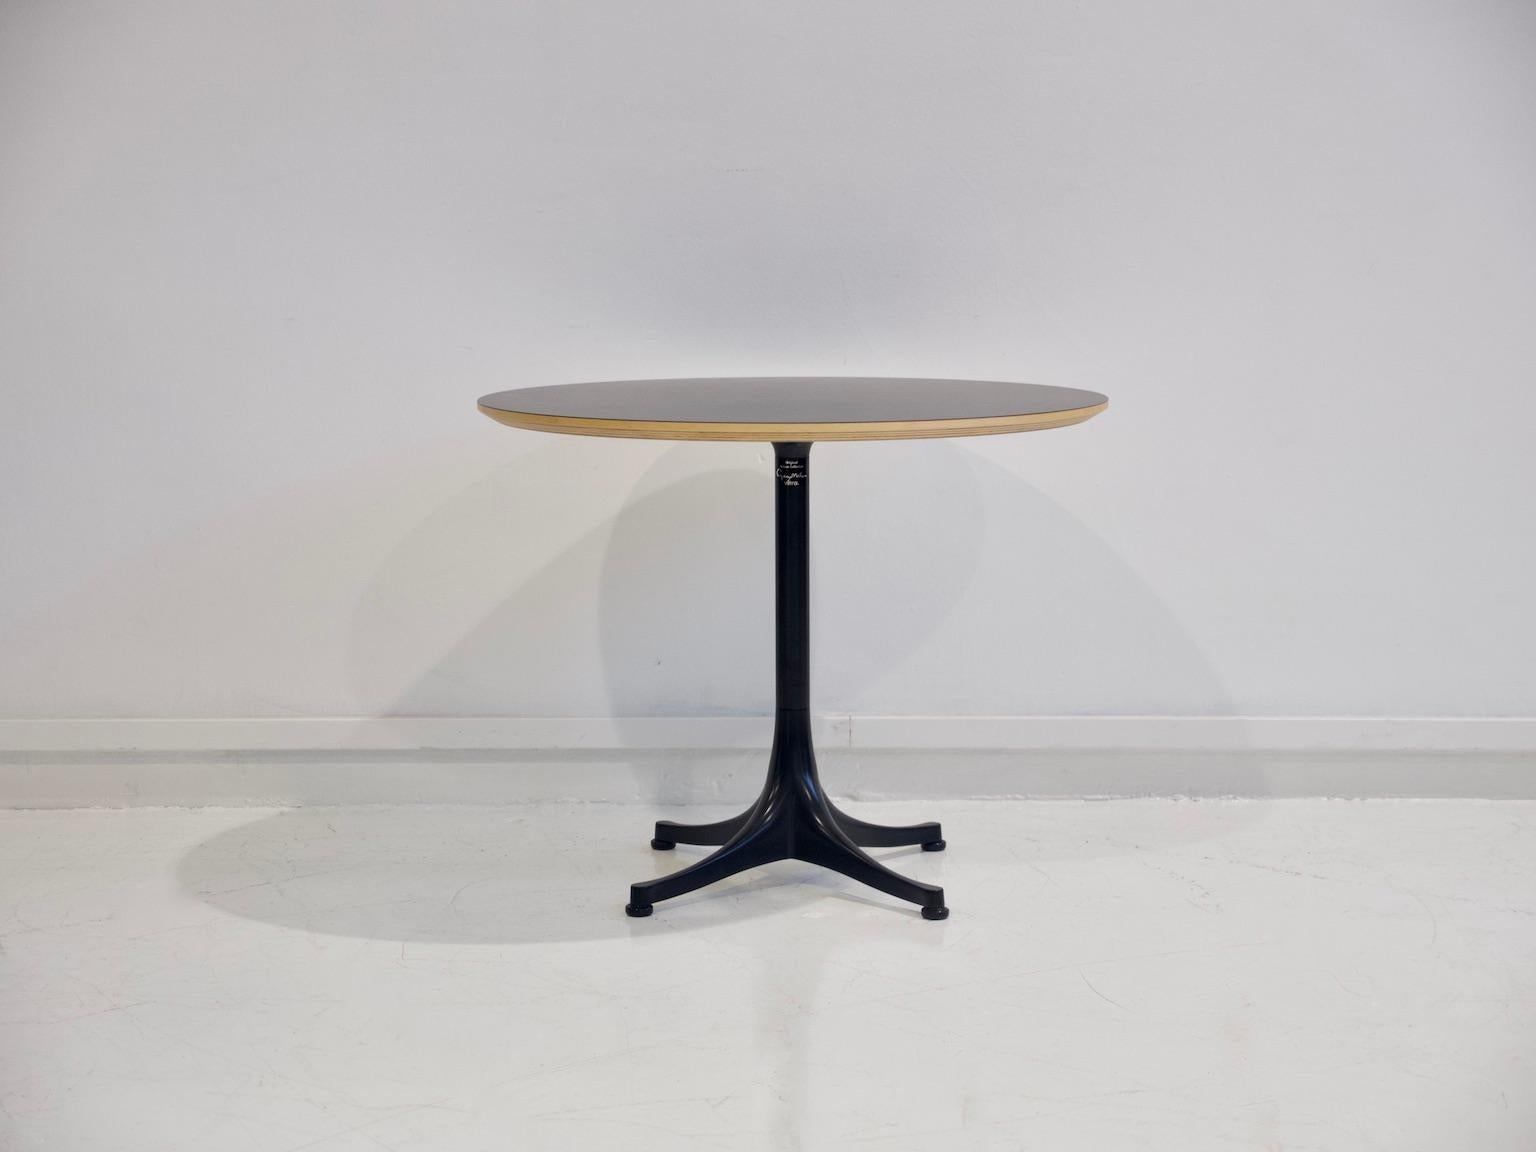 Coffee or side table, originally designed by George Nelson in 1954, with four-branched base in black lacquered aluminum. Tabletop in black laminate with a visible edge in birch veneer. Produced by Vitra.